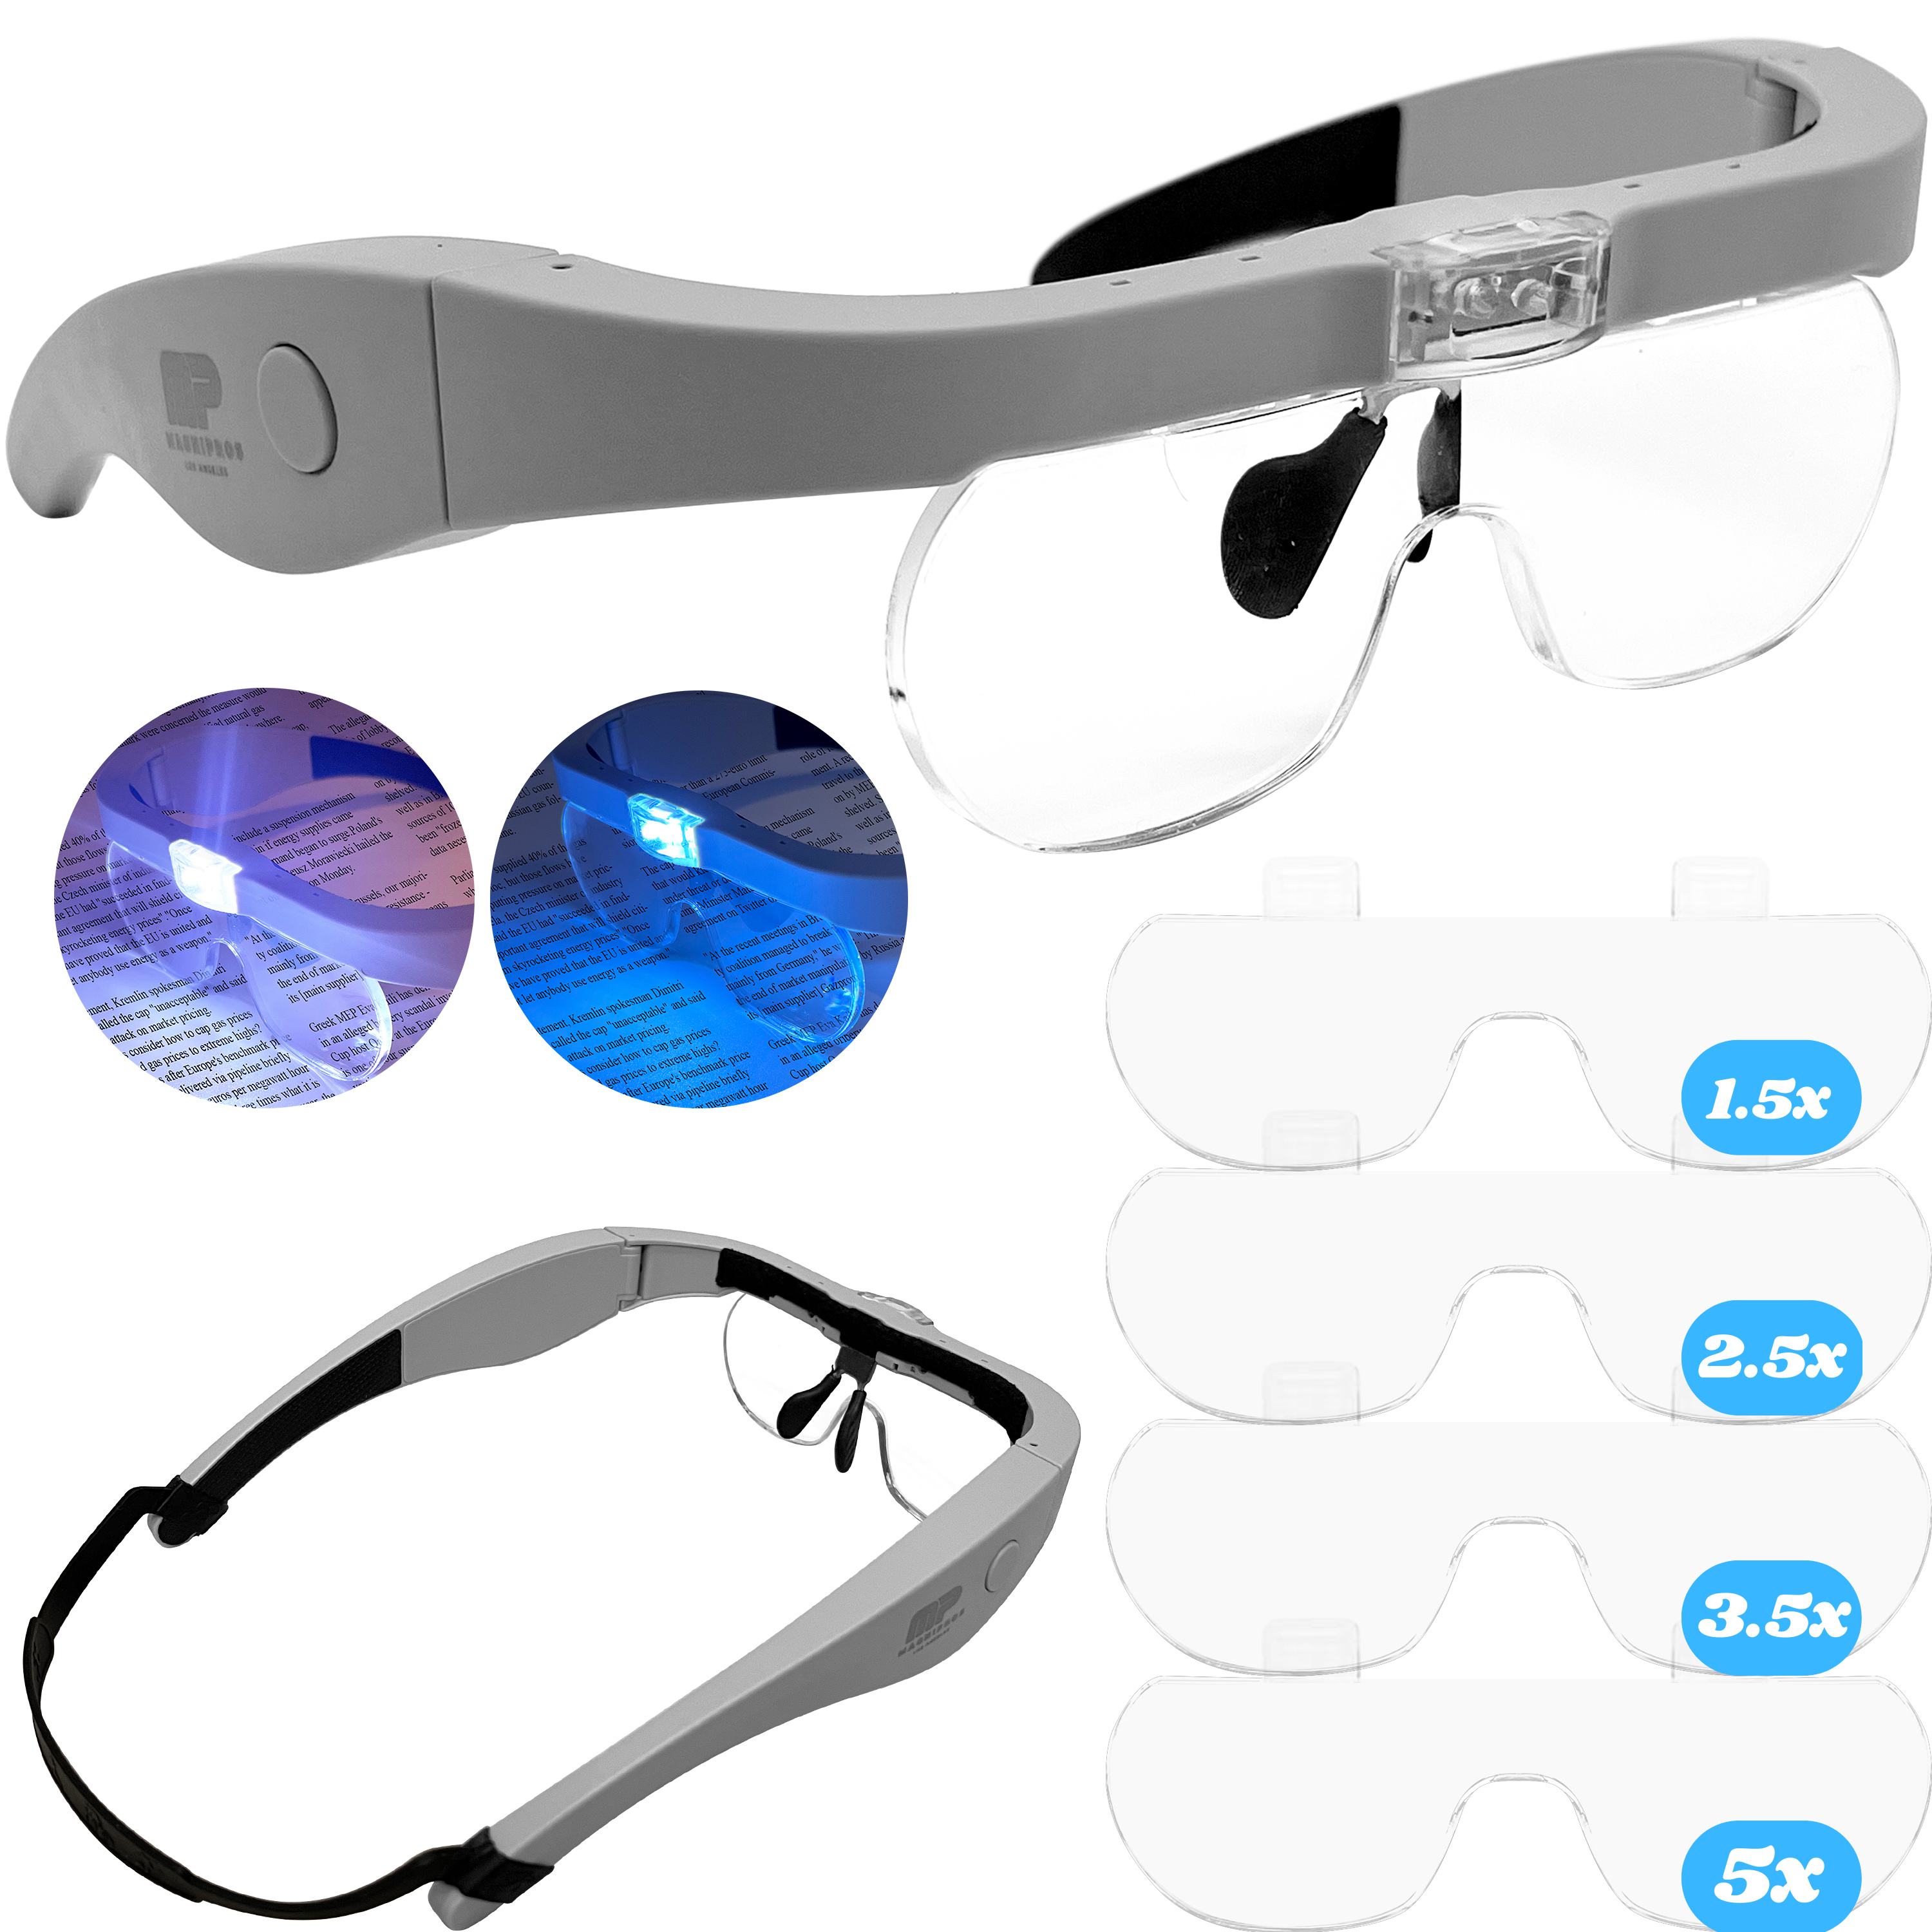 Magnifying Glasses with LED Light And Interchangeable Lenses